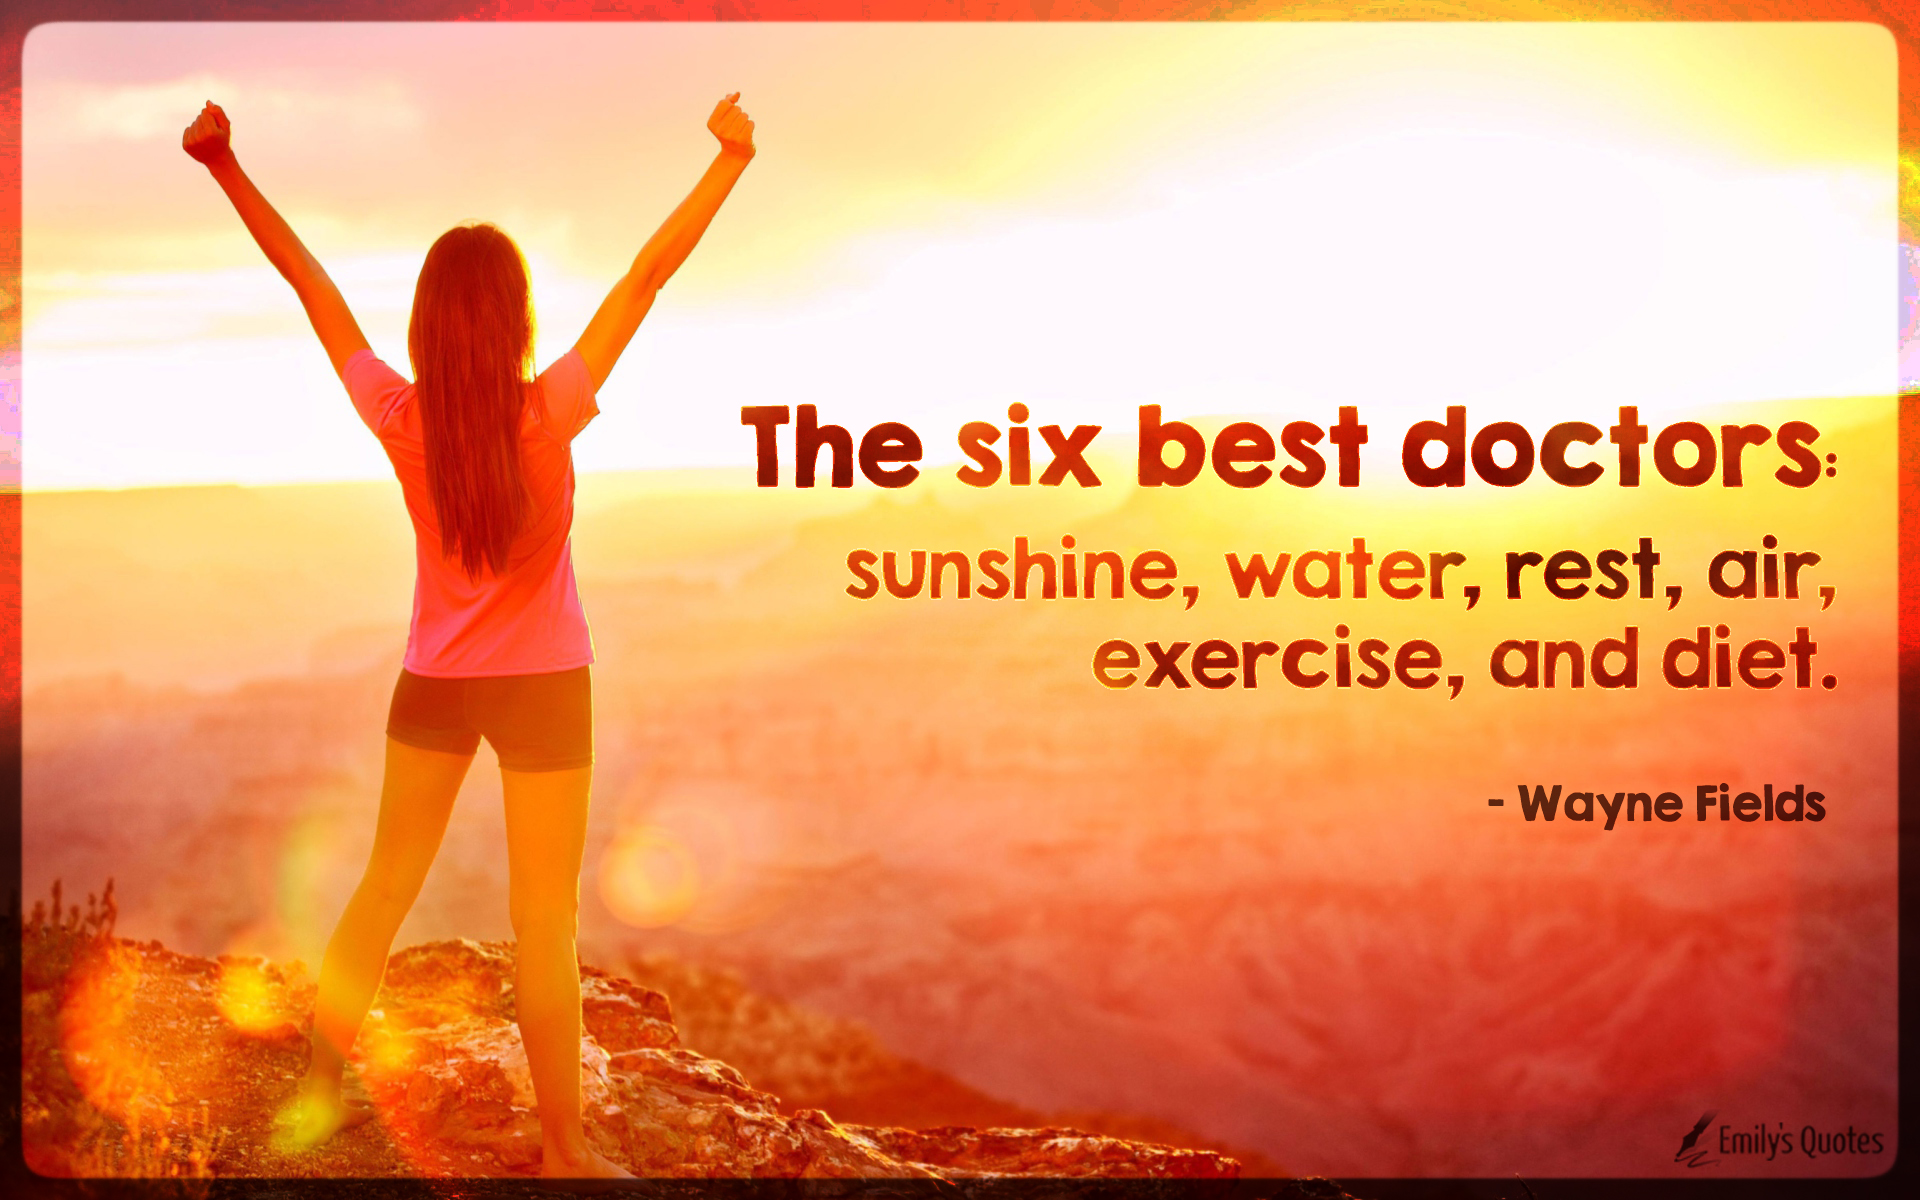 The six best doctors: sunshine, water, rest, air, exercise, and diet